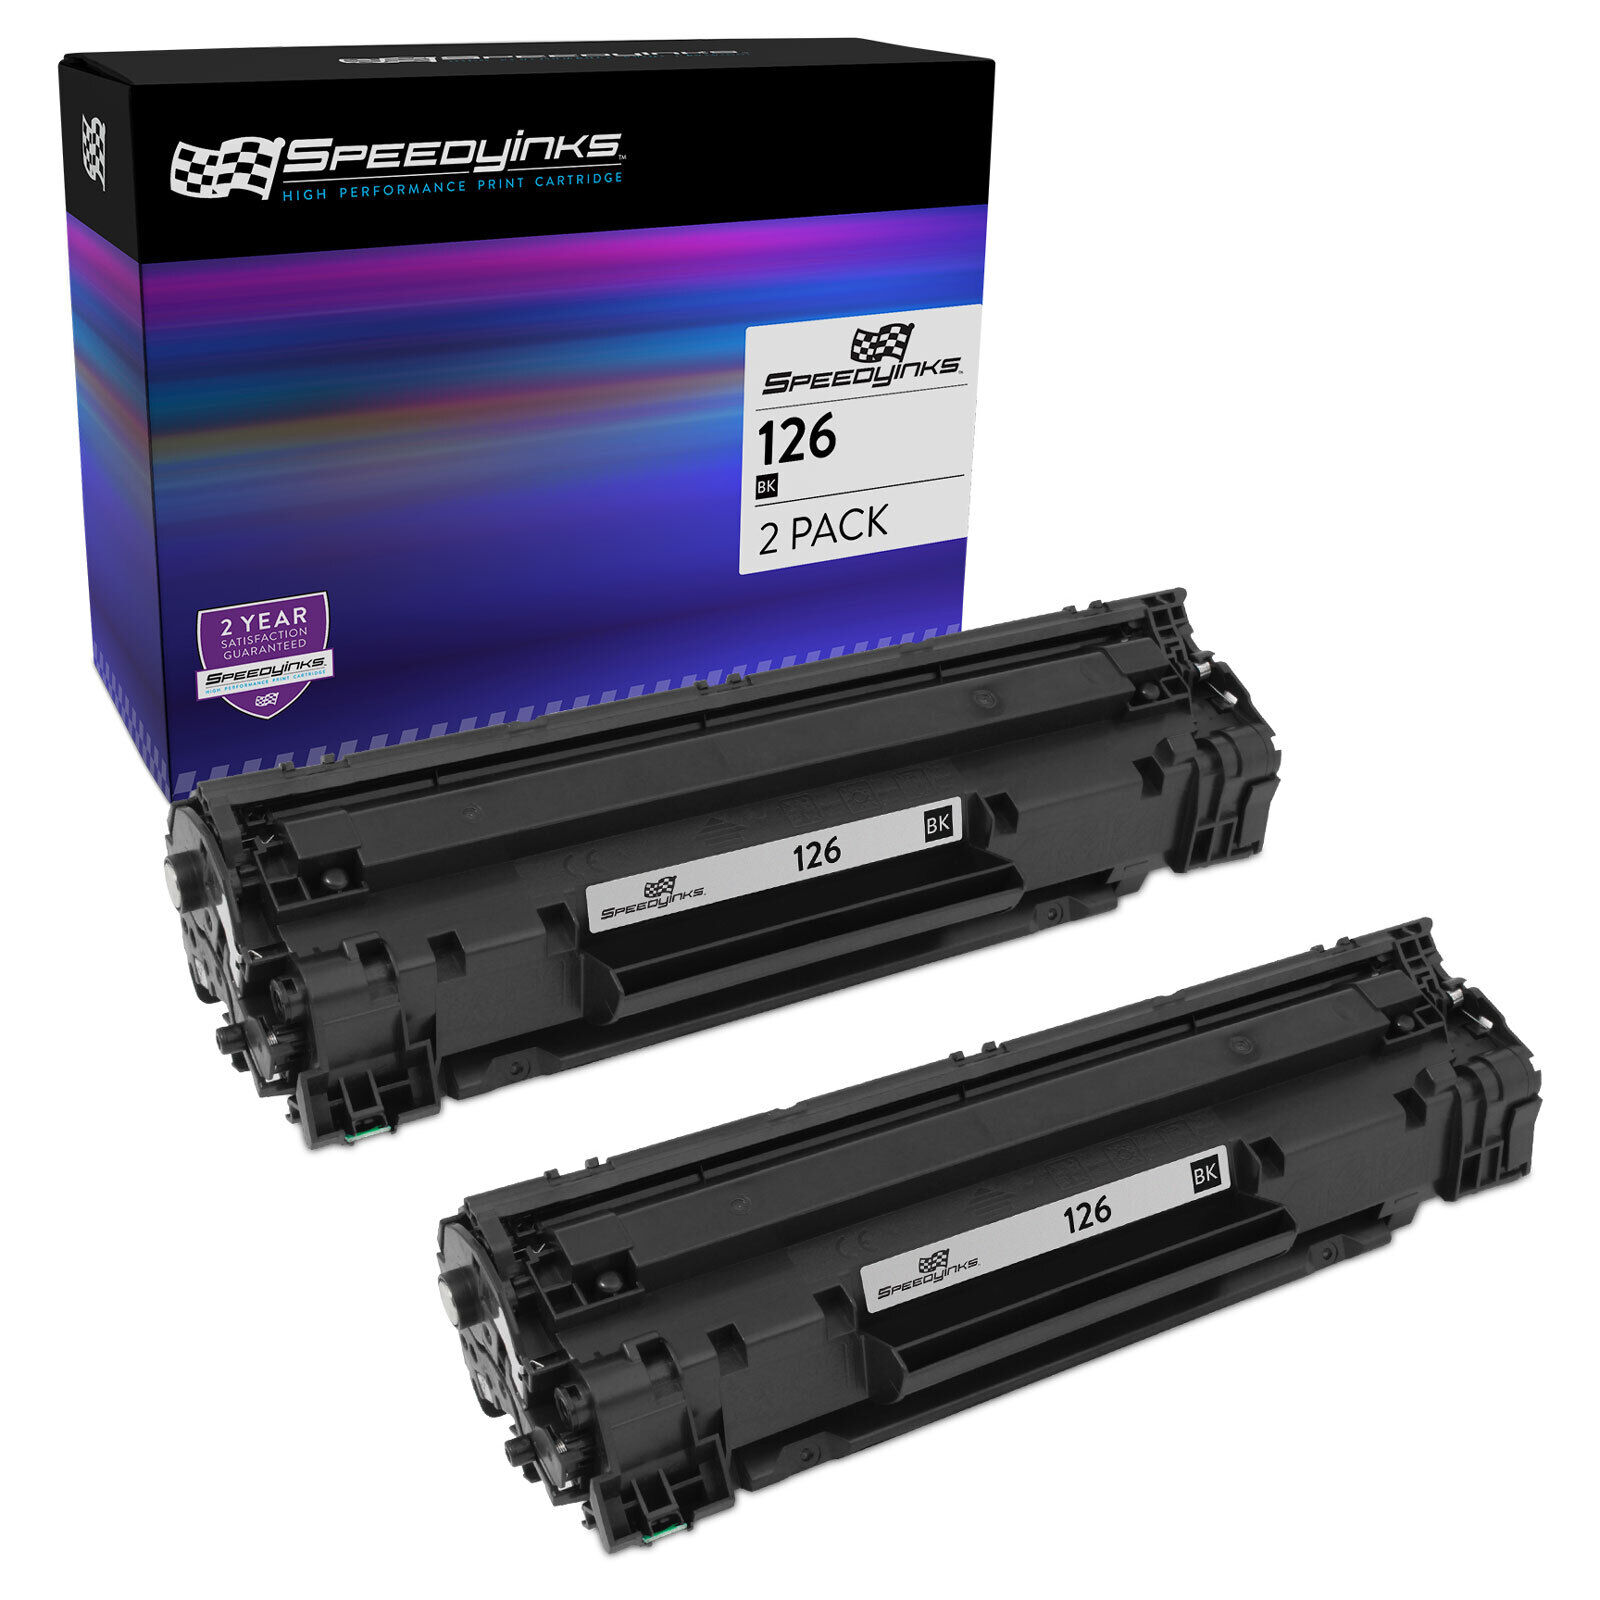 SPEEDYINKS Compatible Toner Cartridge for Canon 126 (Black, 2-Pack)